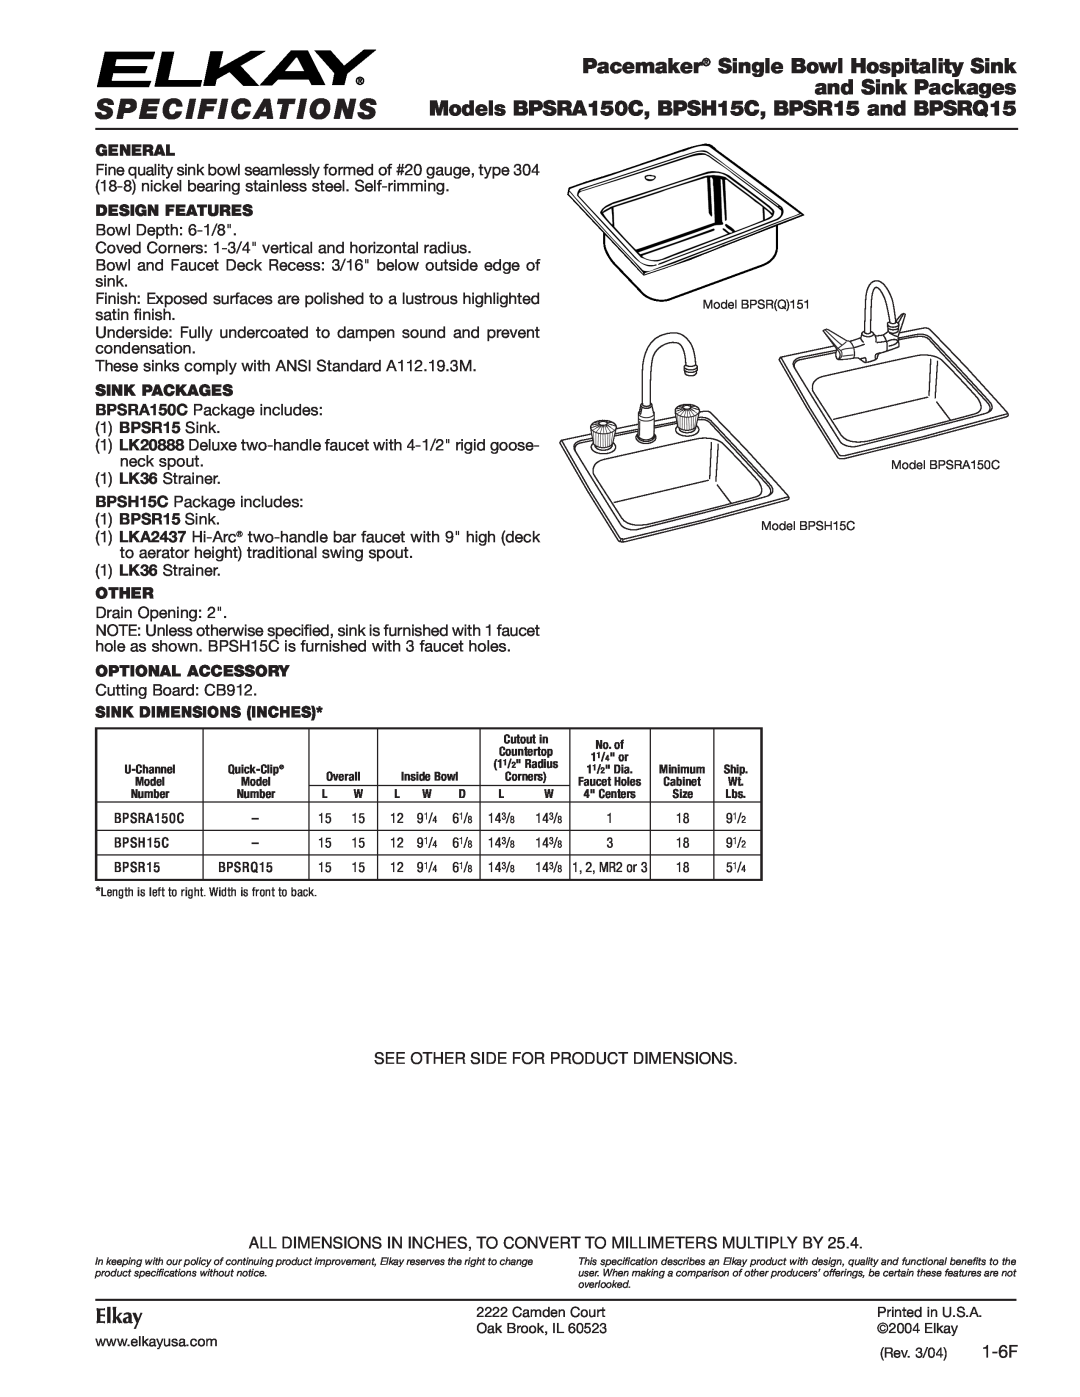 Elkay BPSH15C specifications Pacemaker Single Bowl Hospitality Sink, and Sink Packages, Elkay, 1-6F, General, 1BPSR15 Sink 